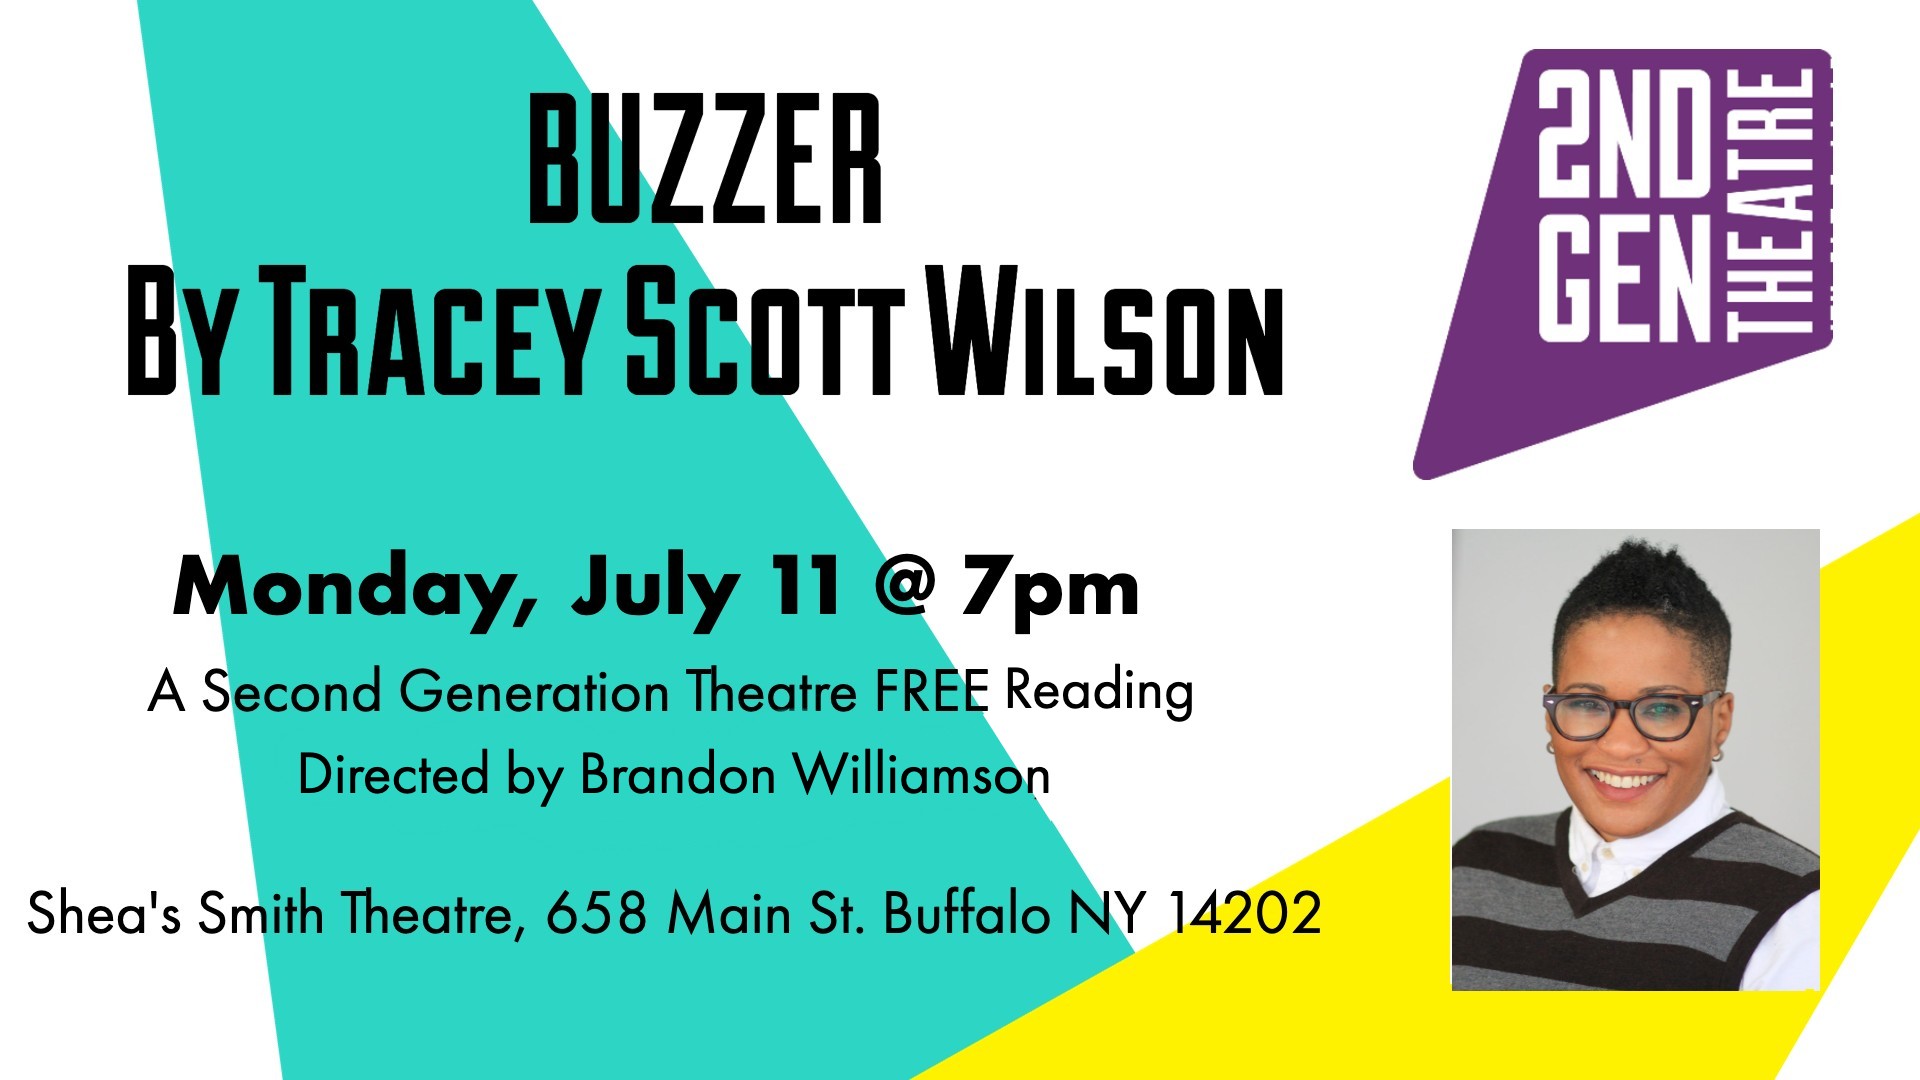 SGT presents BUZZER by Tracey Scott Willson as part of our free reading series at hte Shea's Smith Theatre. Directed by Brandon Williamson